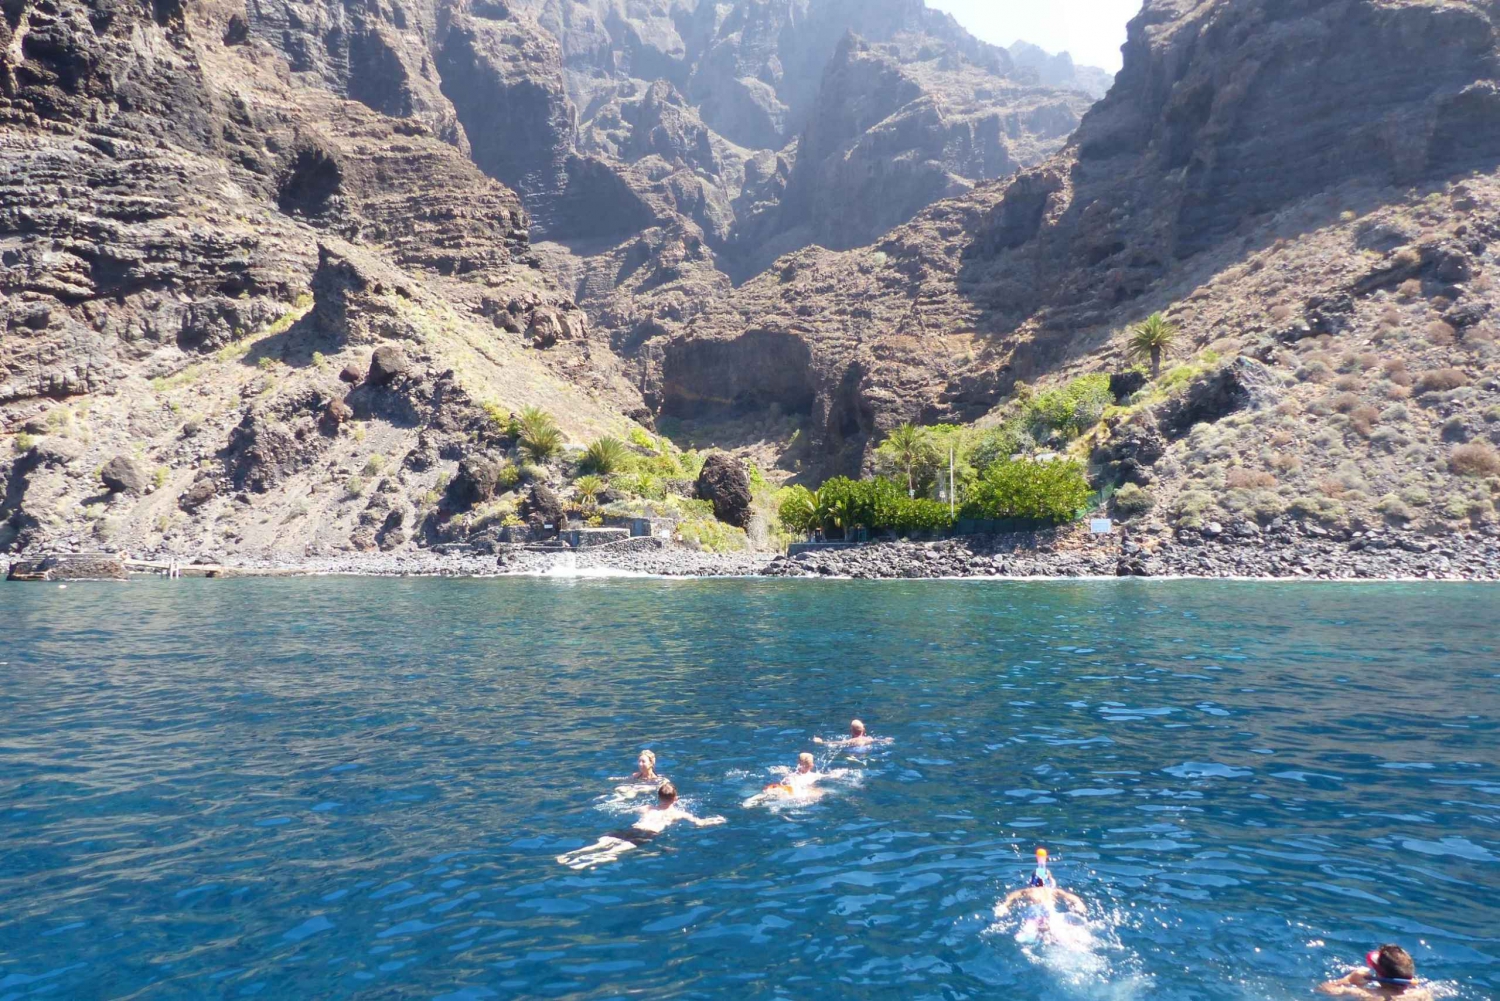 Tenerife: Los Gigantes Whale Watching Cruise by Sail Boat